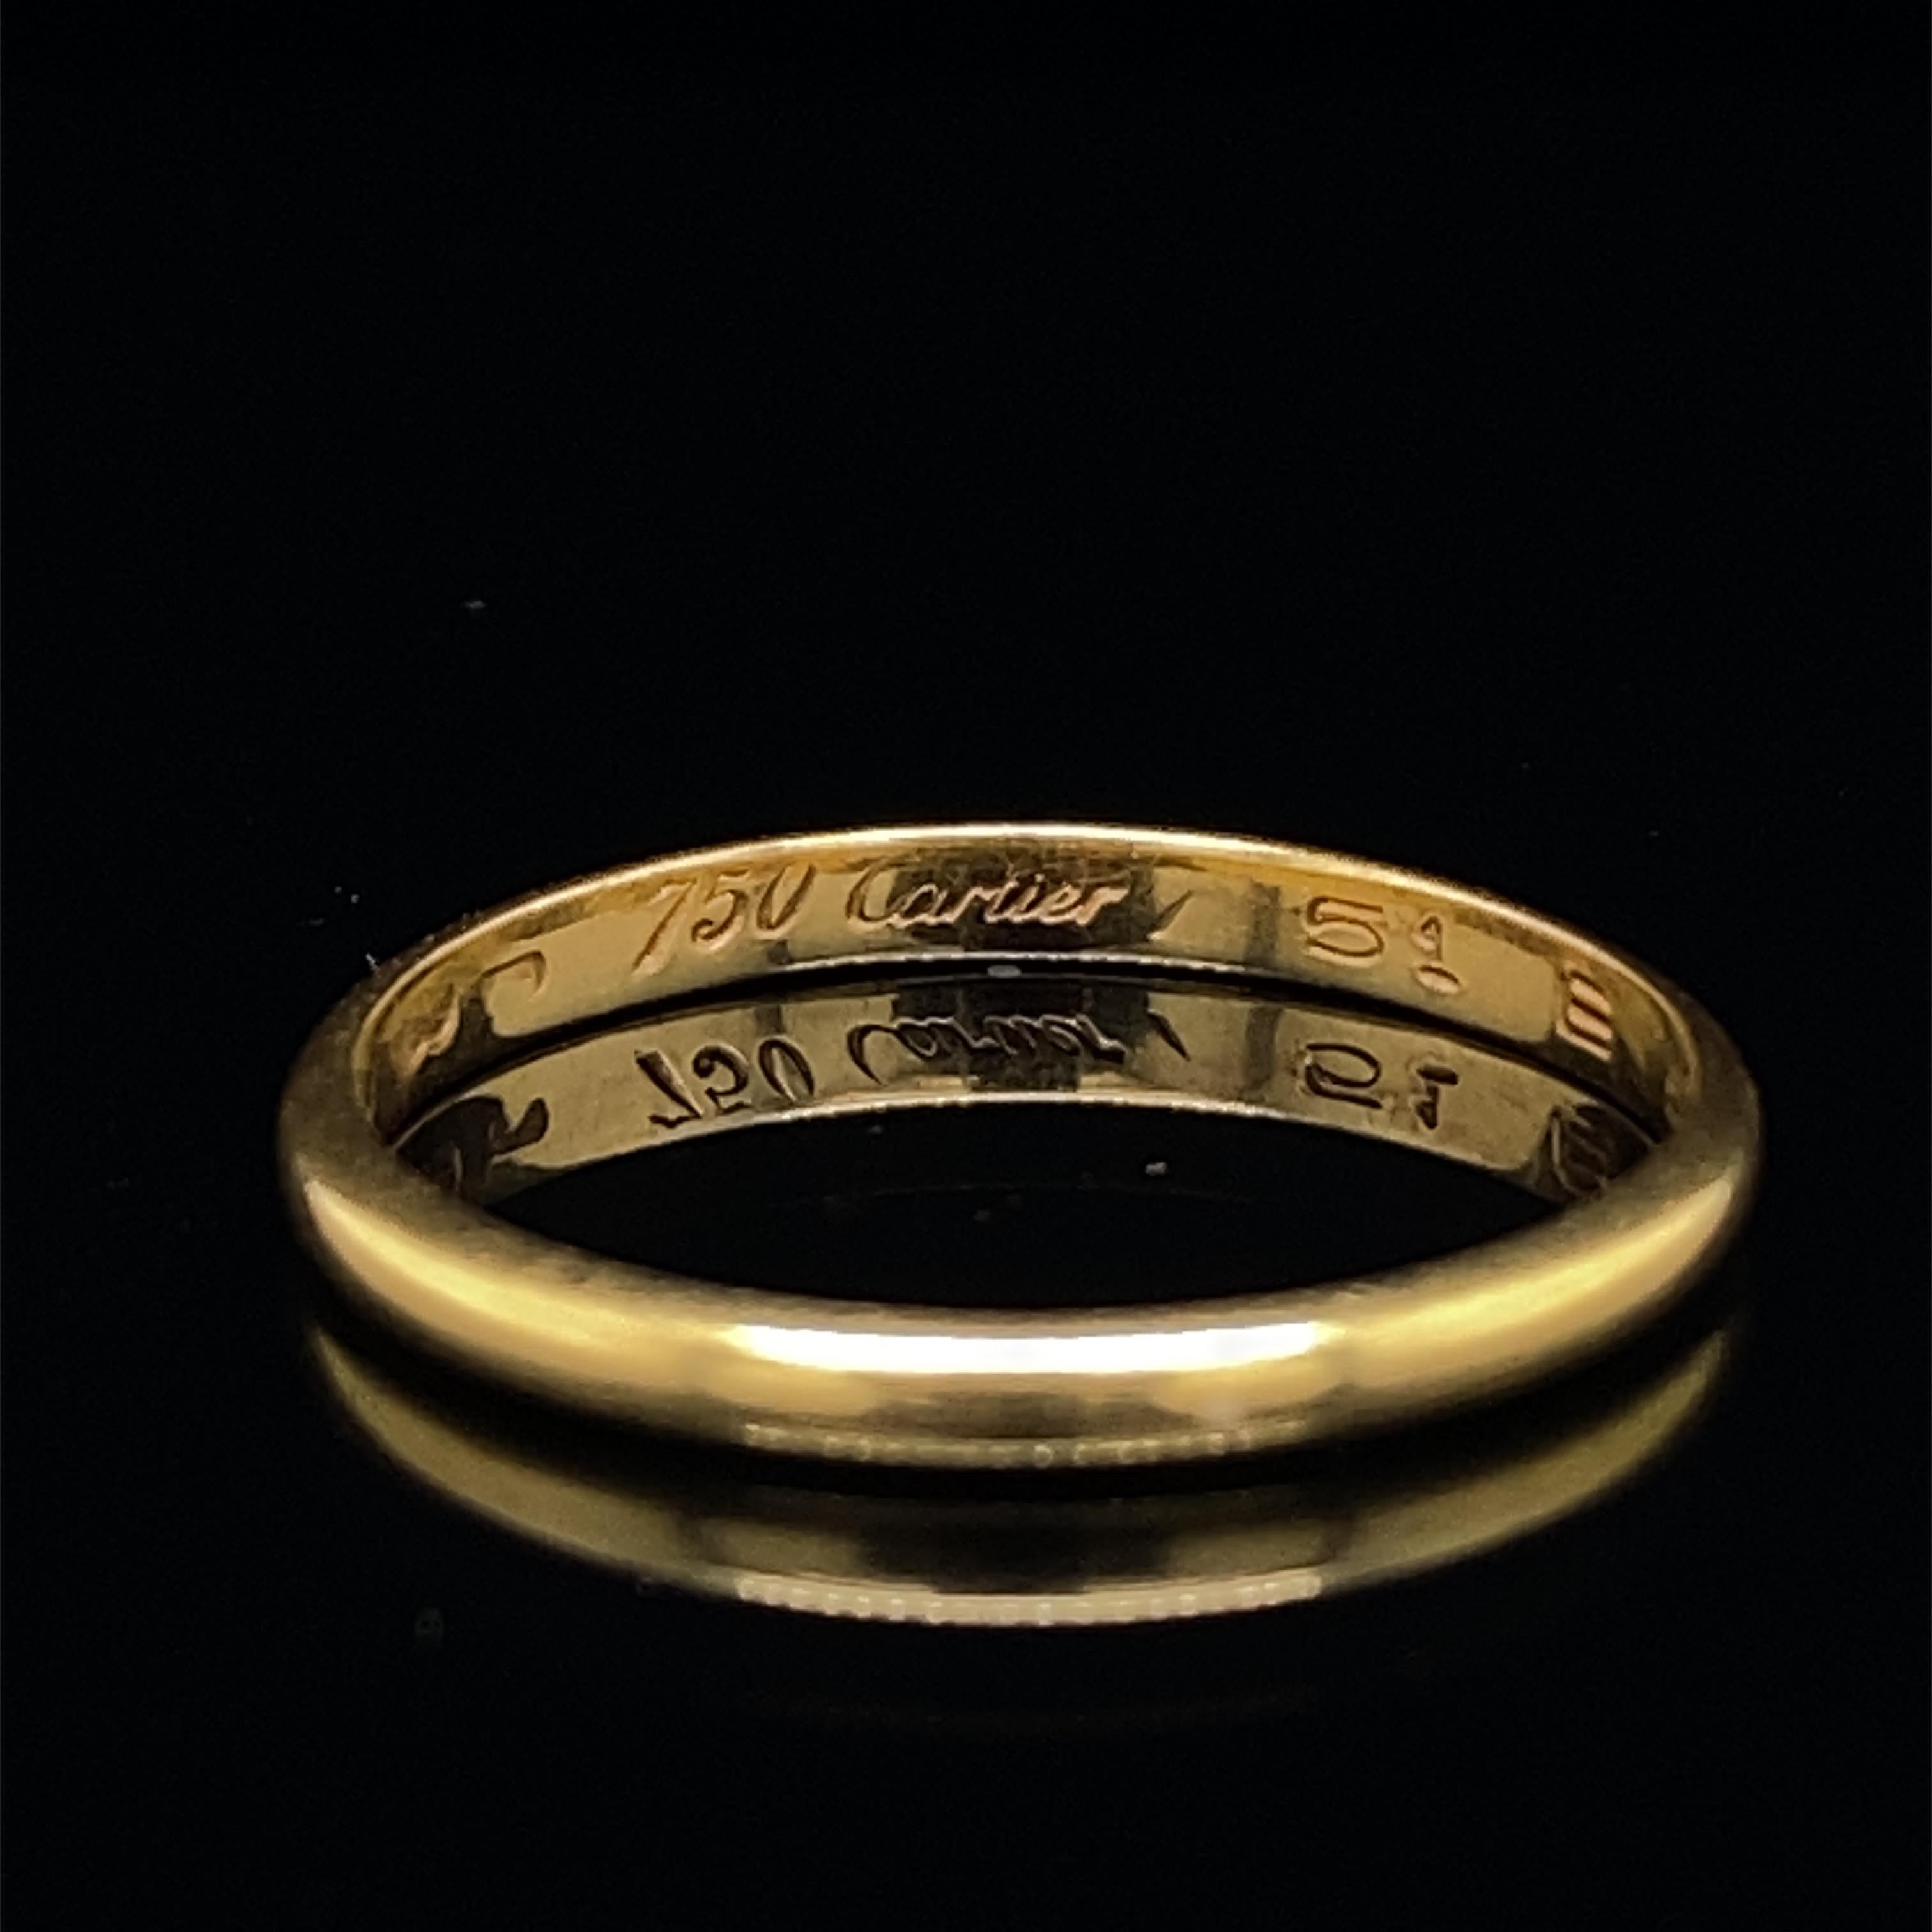 A retro Cartier wedding band 18 karat yellow gold, circa 1990.

This classic 'D' shaped comfort fit wedding band by Cartier has a smooth polished finish.

Signed 'Cartier', '750', '51' serial no. 135189 

Dimensions:
1.5mm width

Ring size: UK